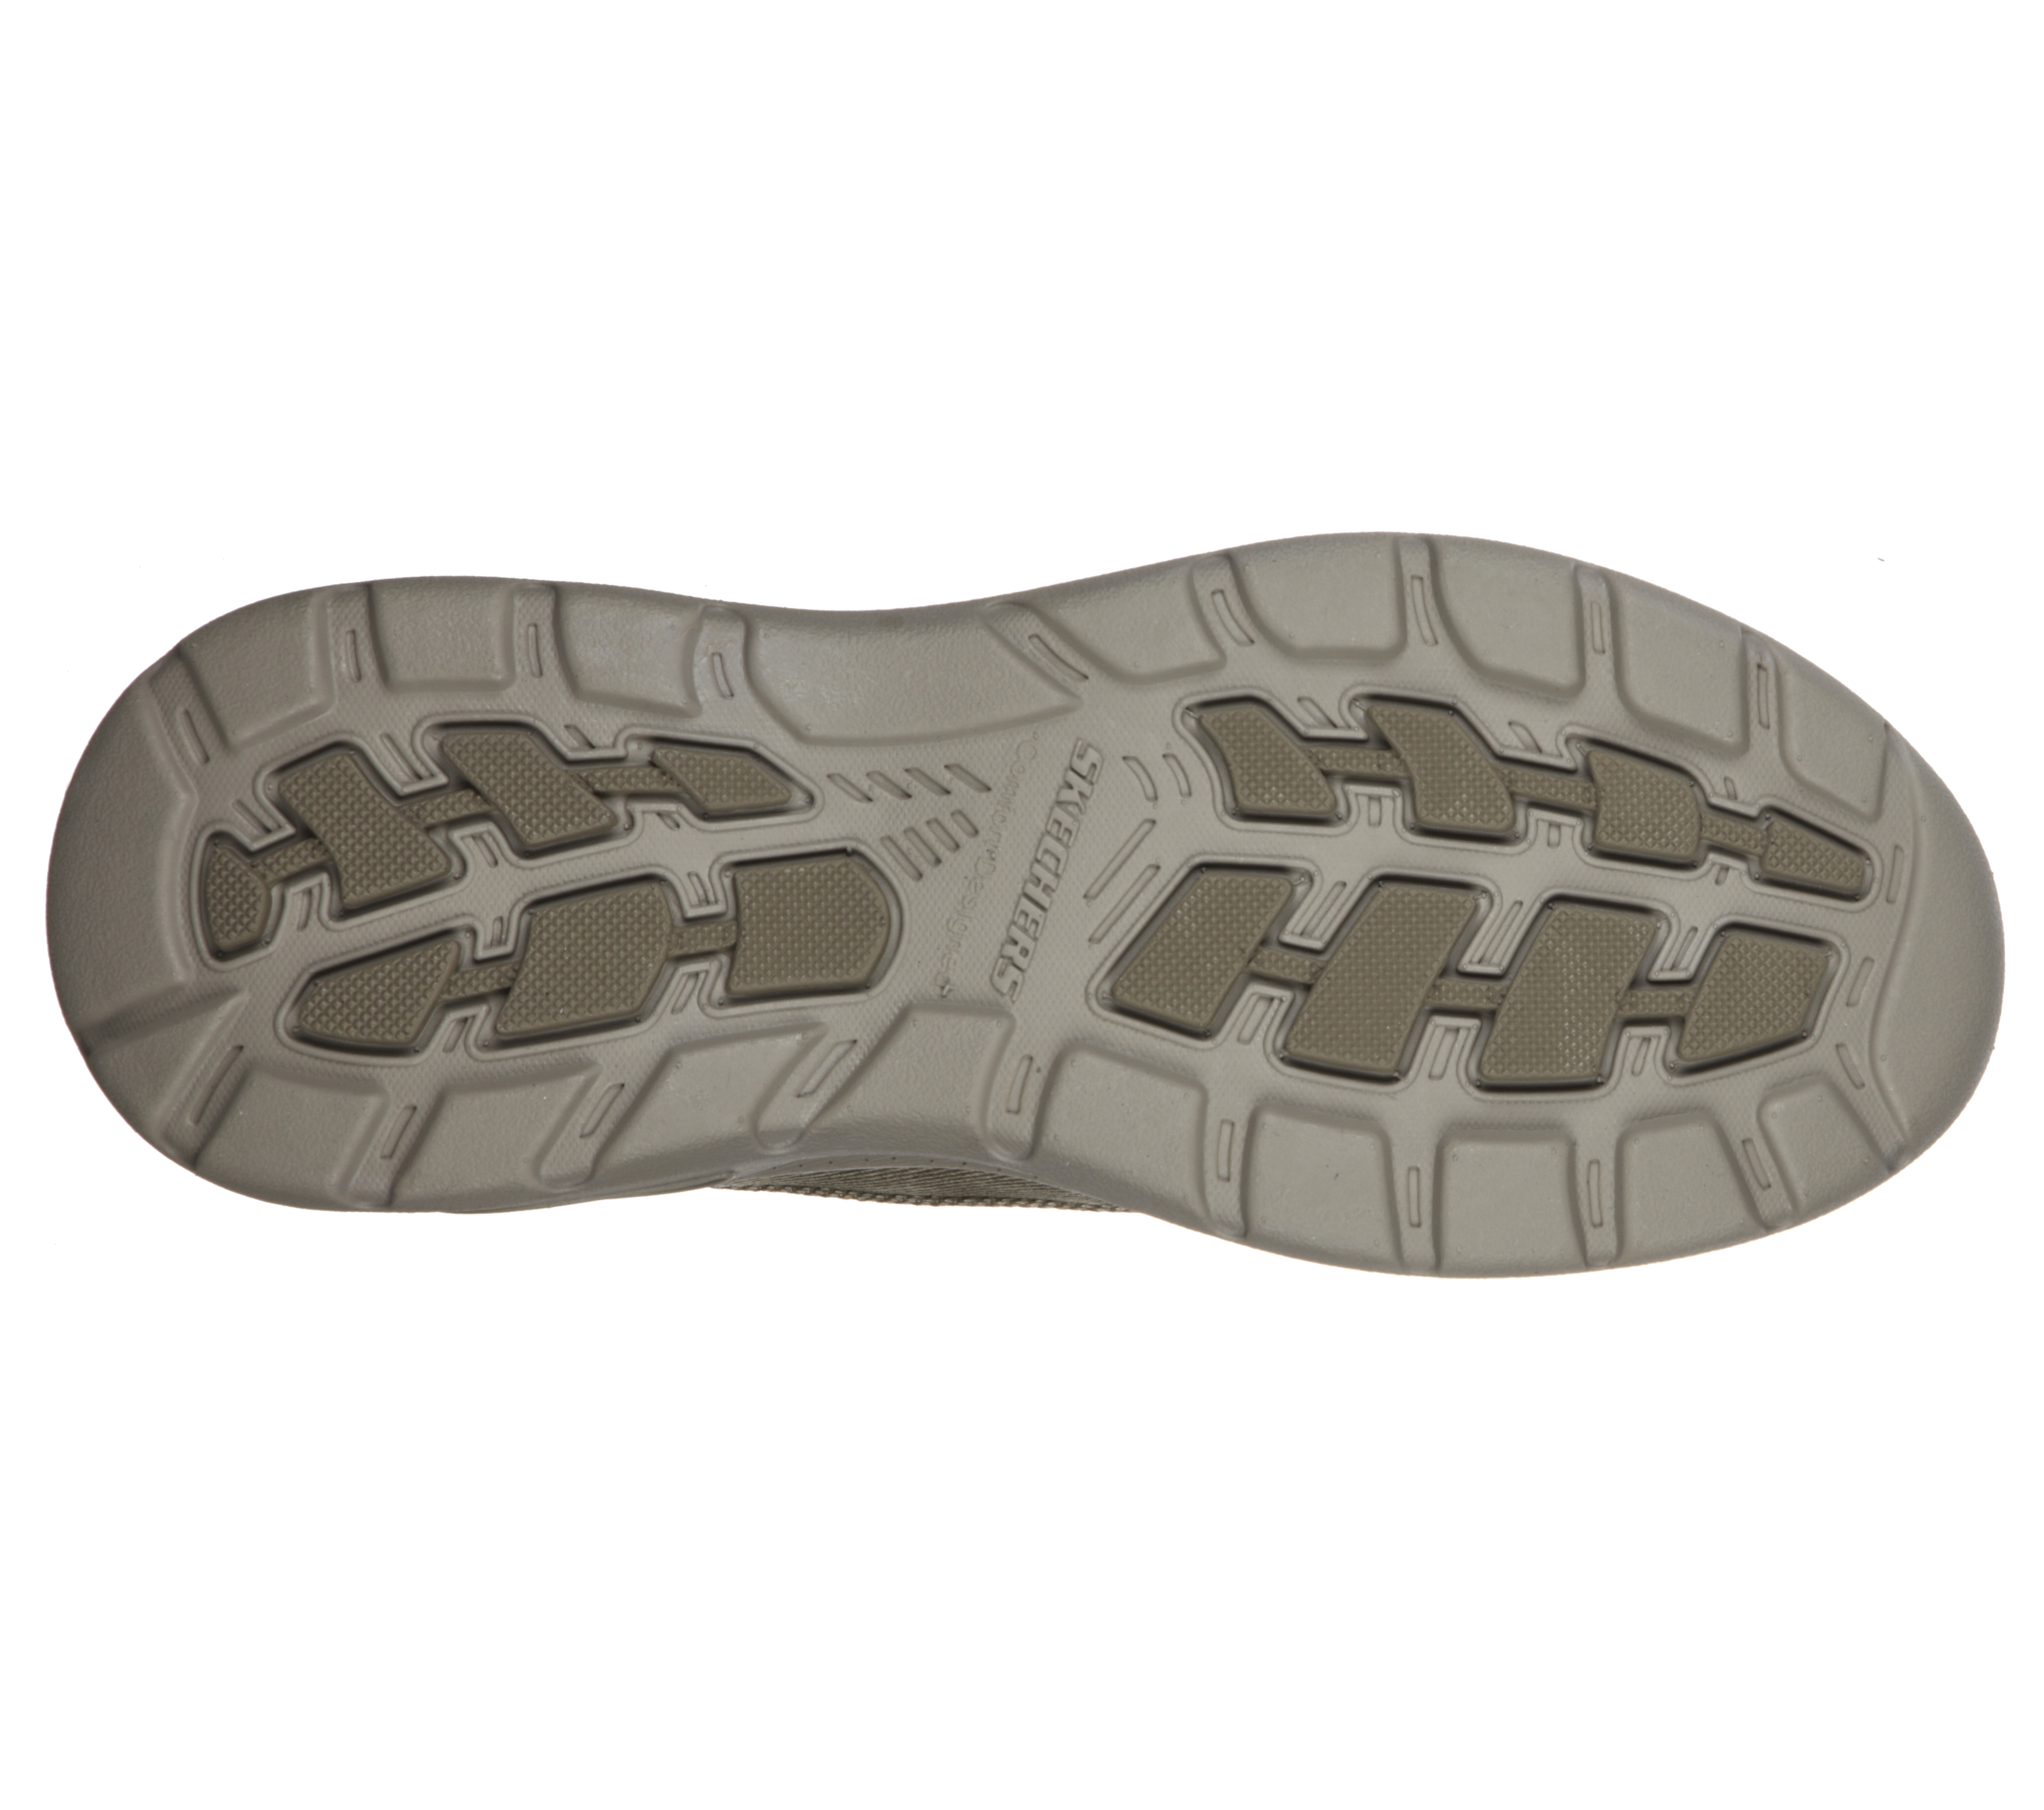 Skechers Arch Fit Motley - Oven